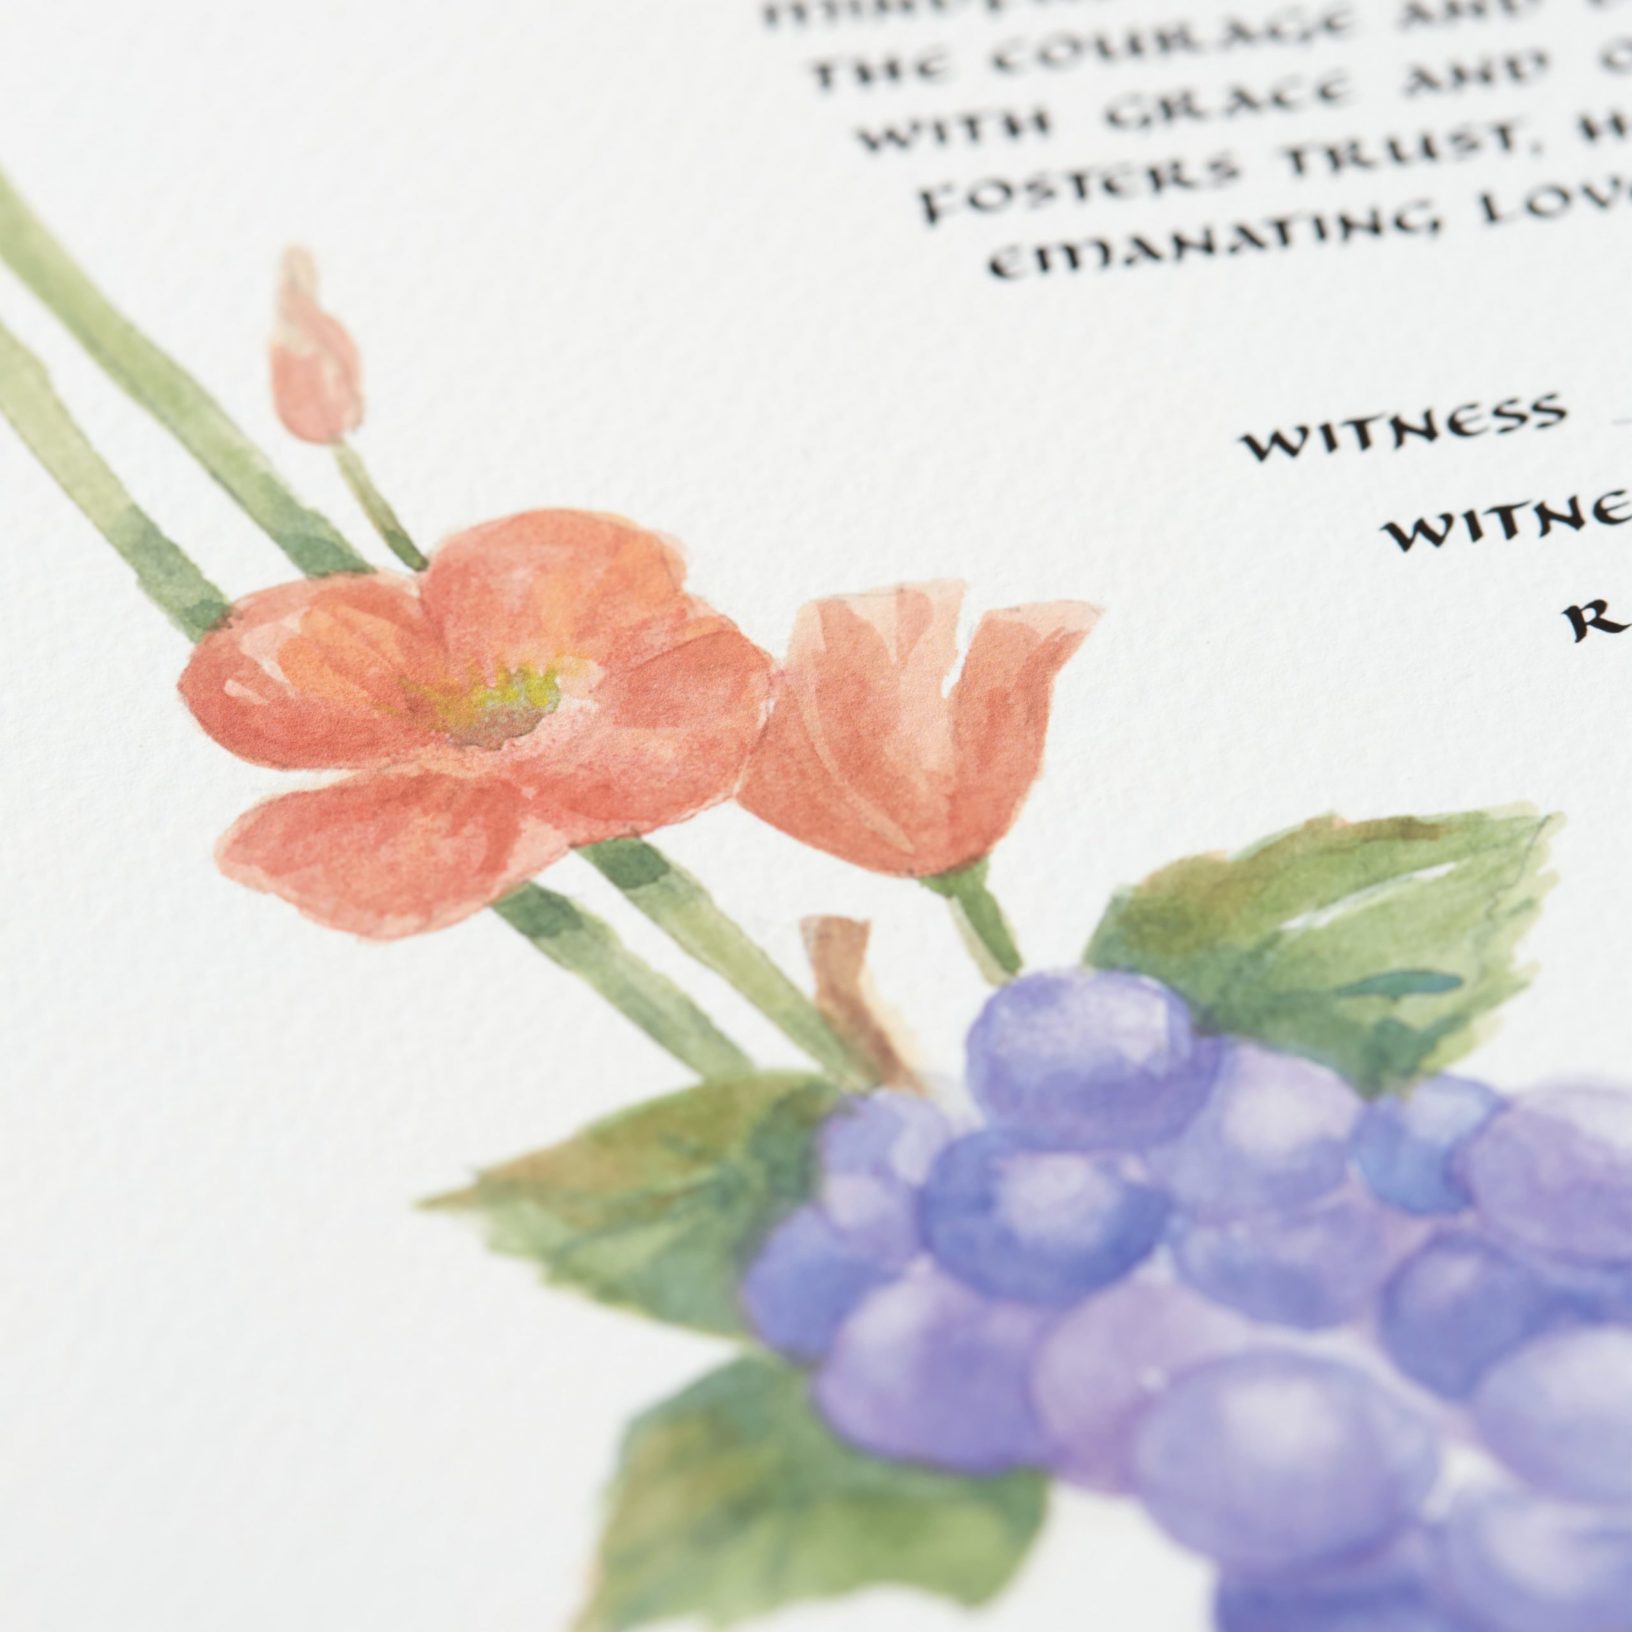 Circle of Poppies and Grapes Ketubah Art by Susan Cone Porges